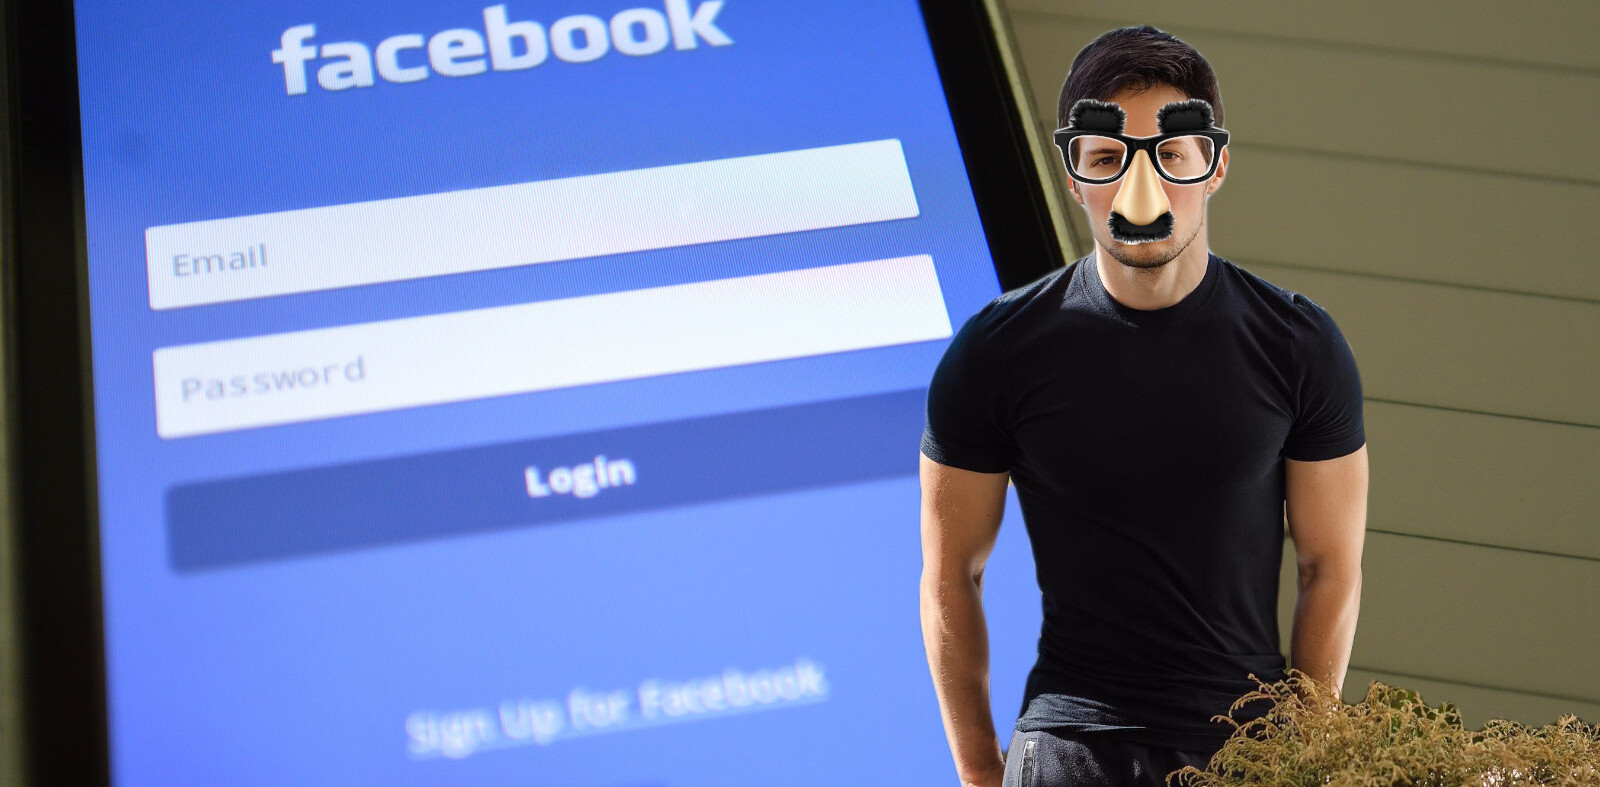 Russian Facebook hit with fake Telegram token ads using Pavel Durov’s face